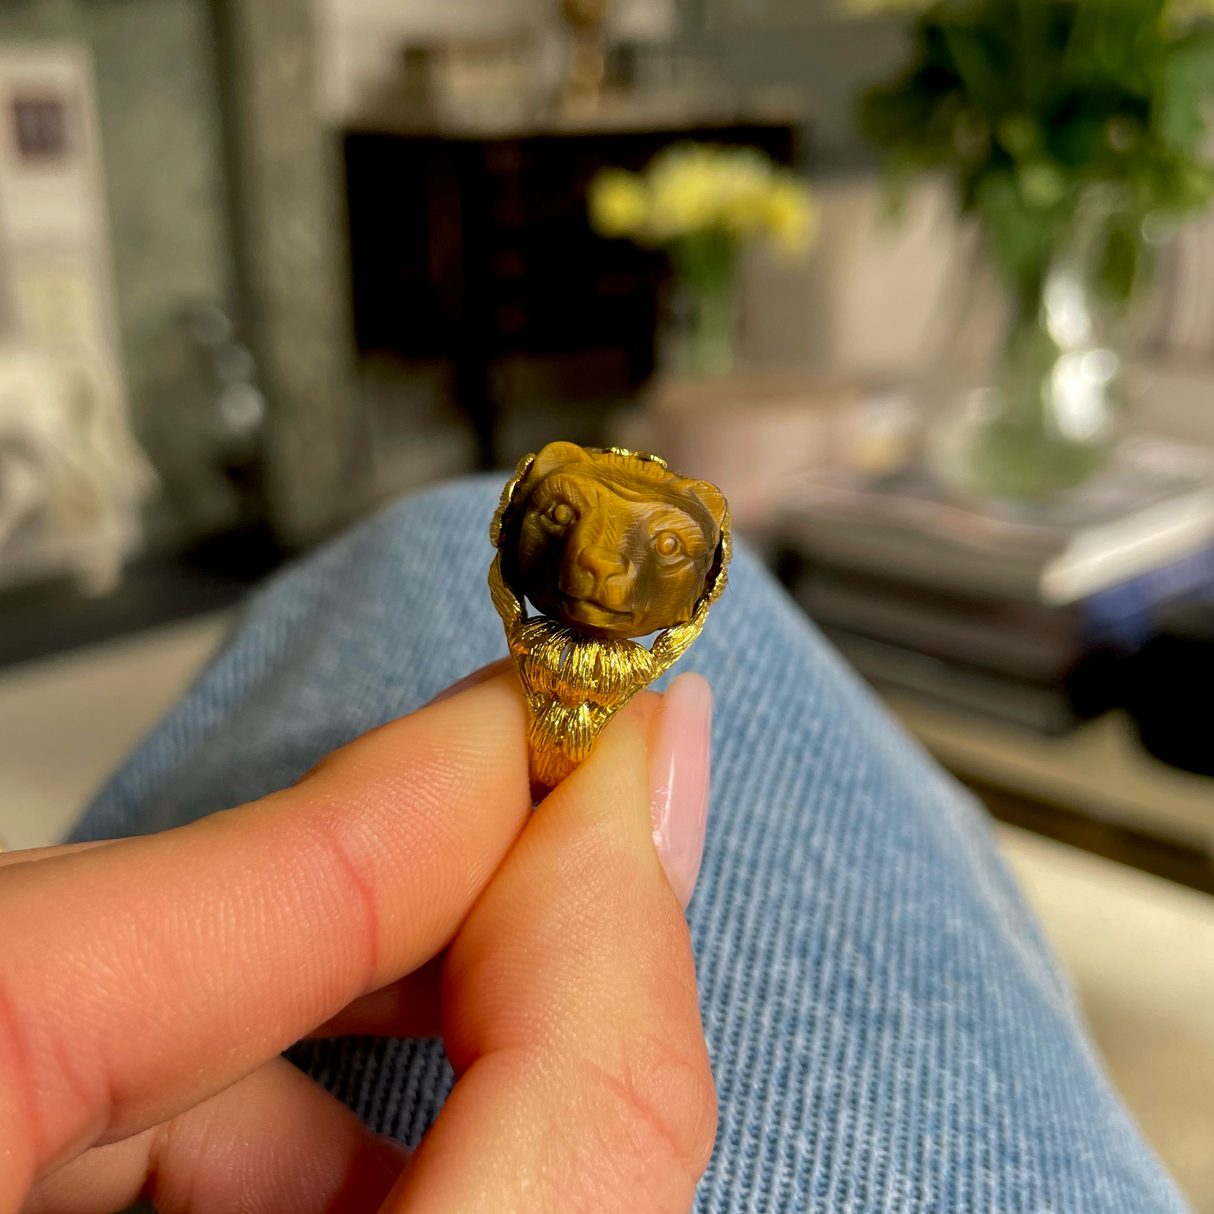 Unusual tiger's eye honey bear and yellow gold ring, held in fingers.